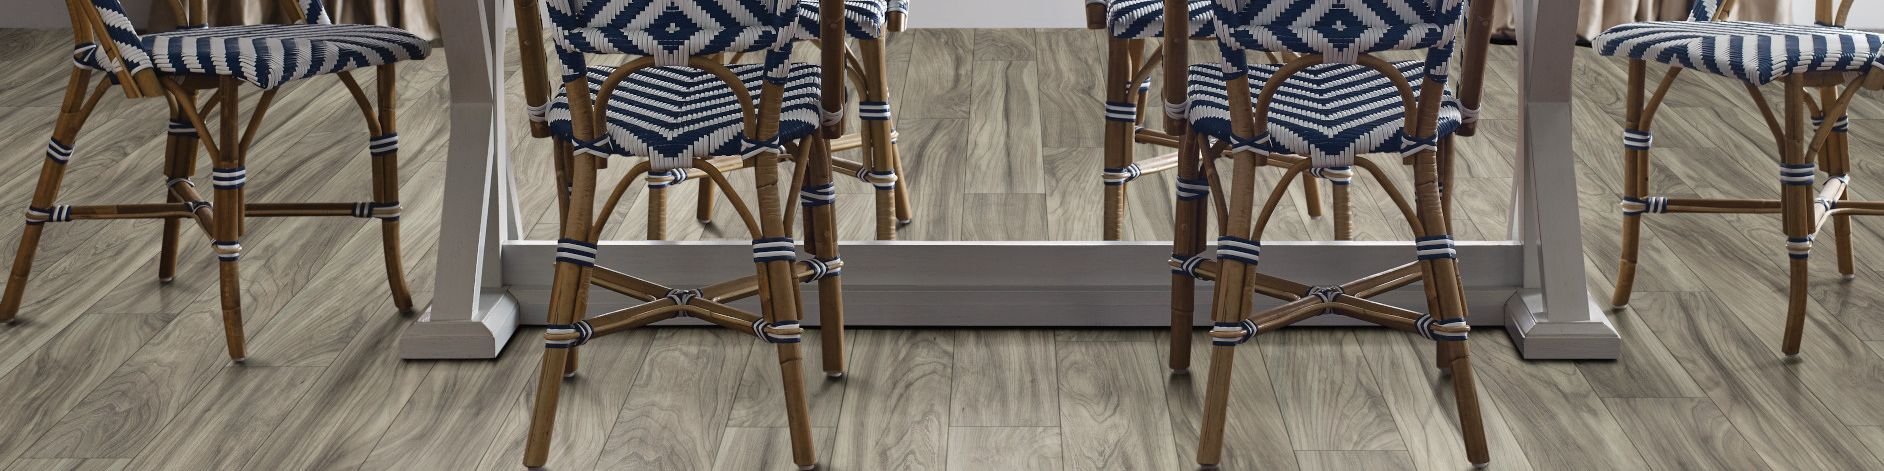 woven dining chairs around a dining table - Dishman Flooring Center